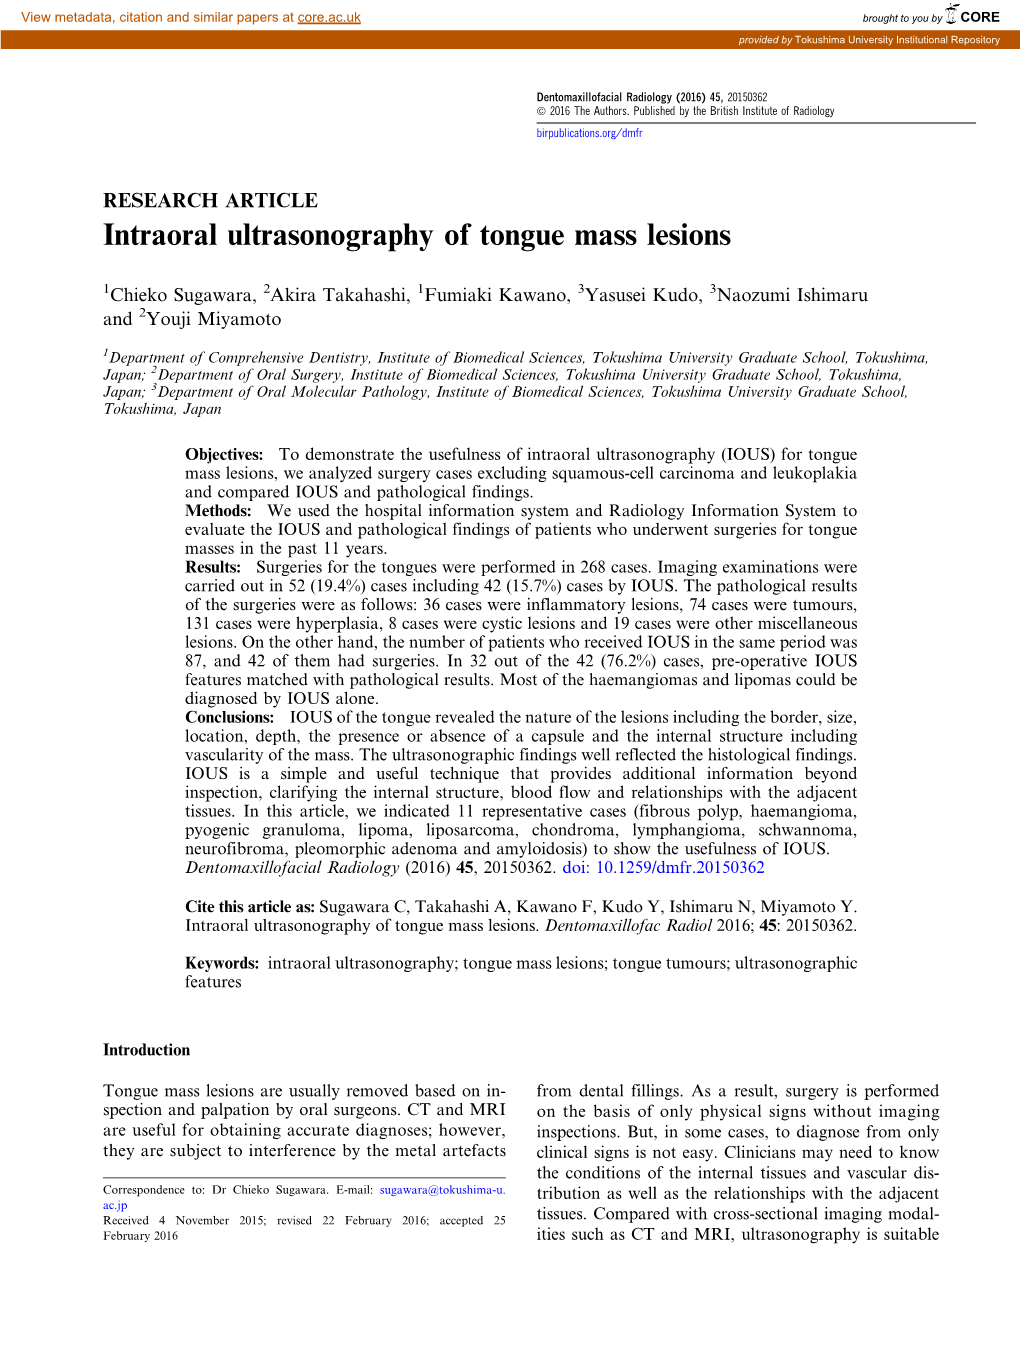 Intraoral Ultrasonography of Tongue Mass Lesions